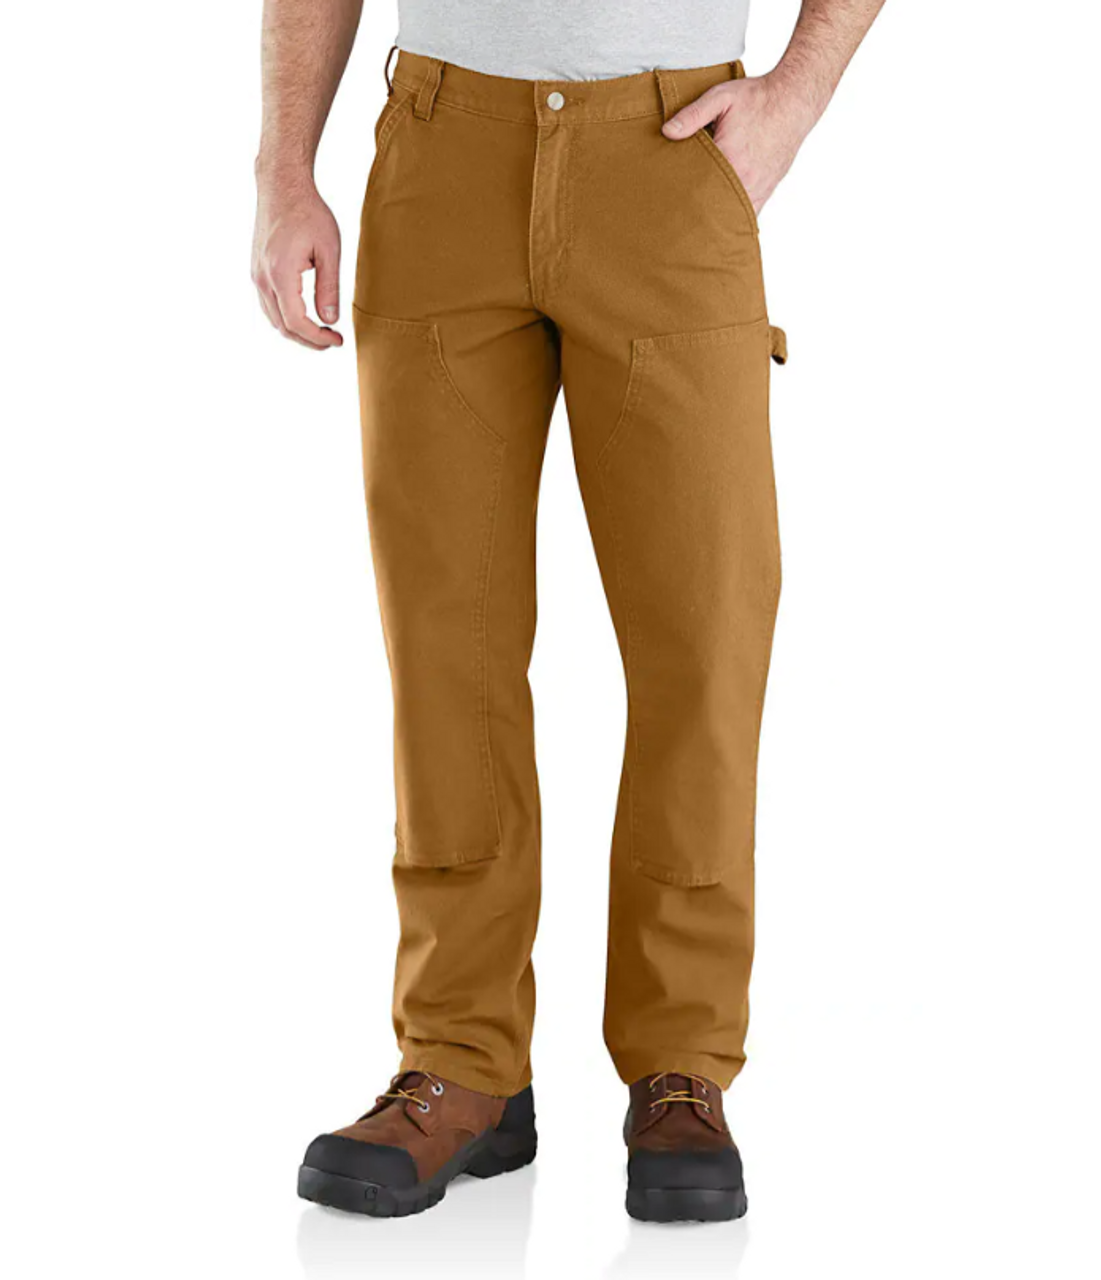 Carhartt Men's Washed Twill Relaxed Fit Work Pant